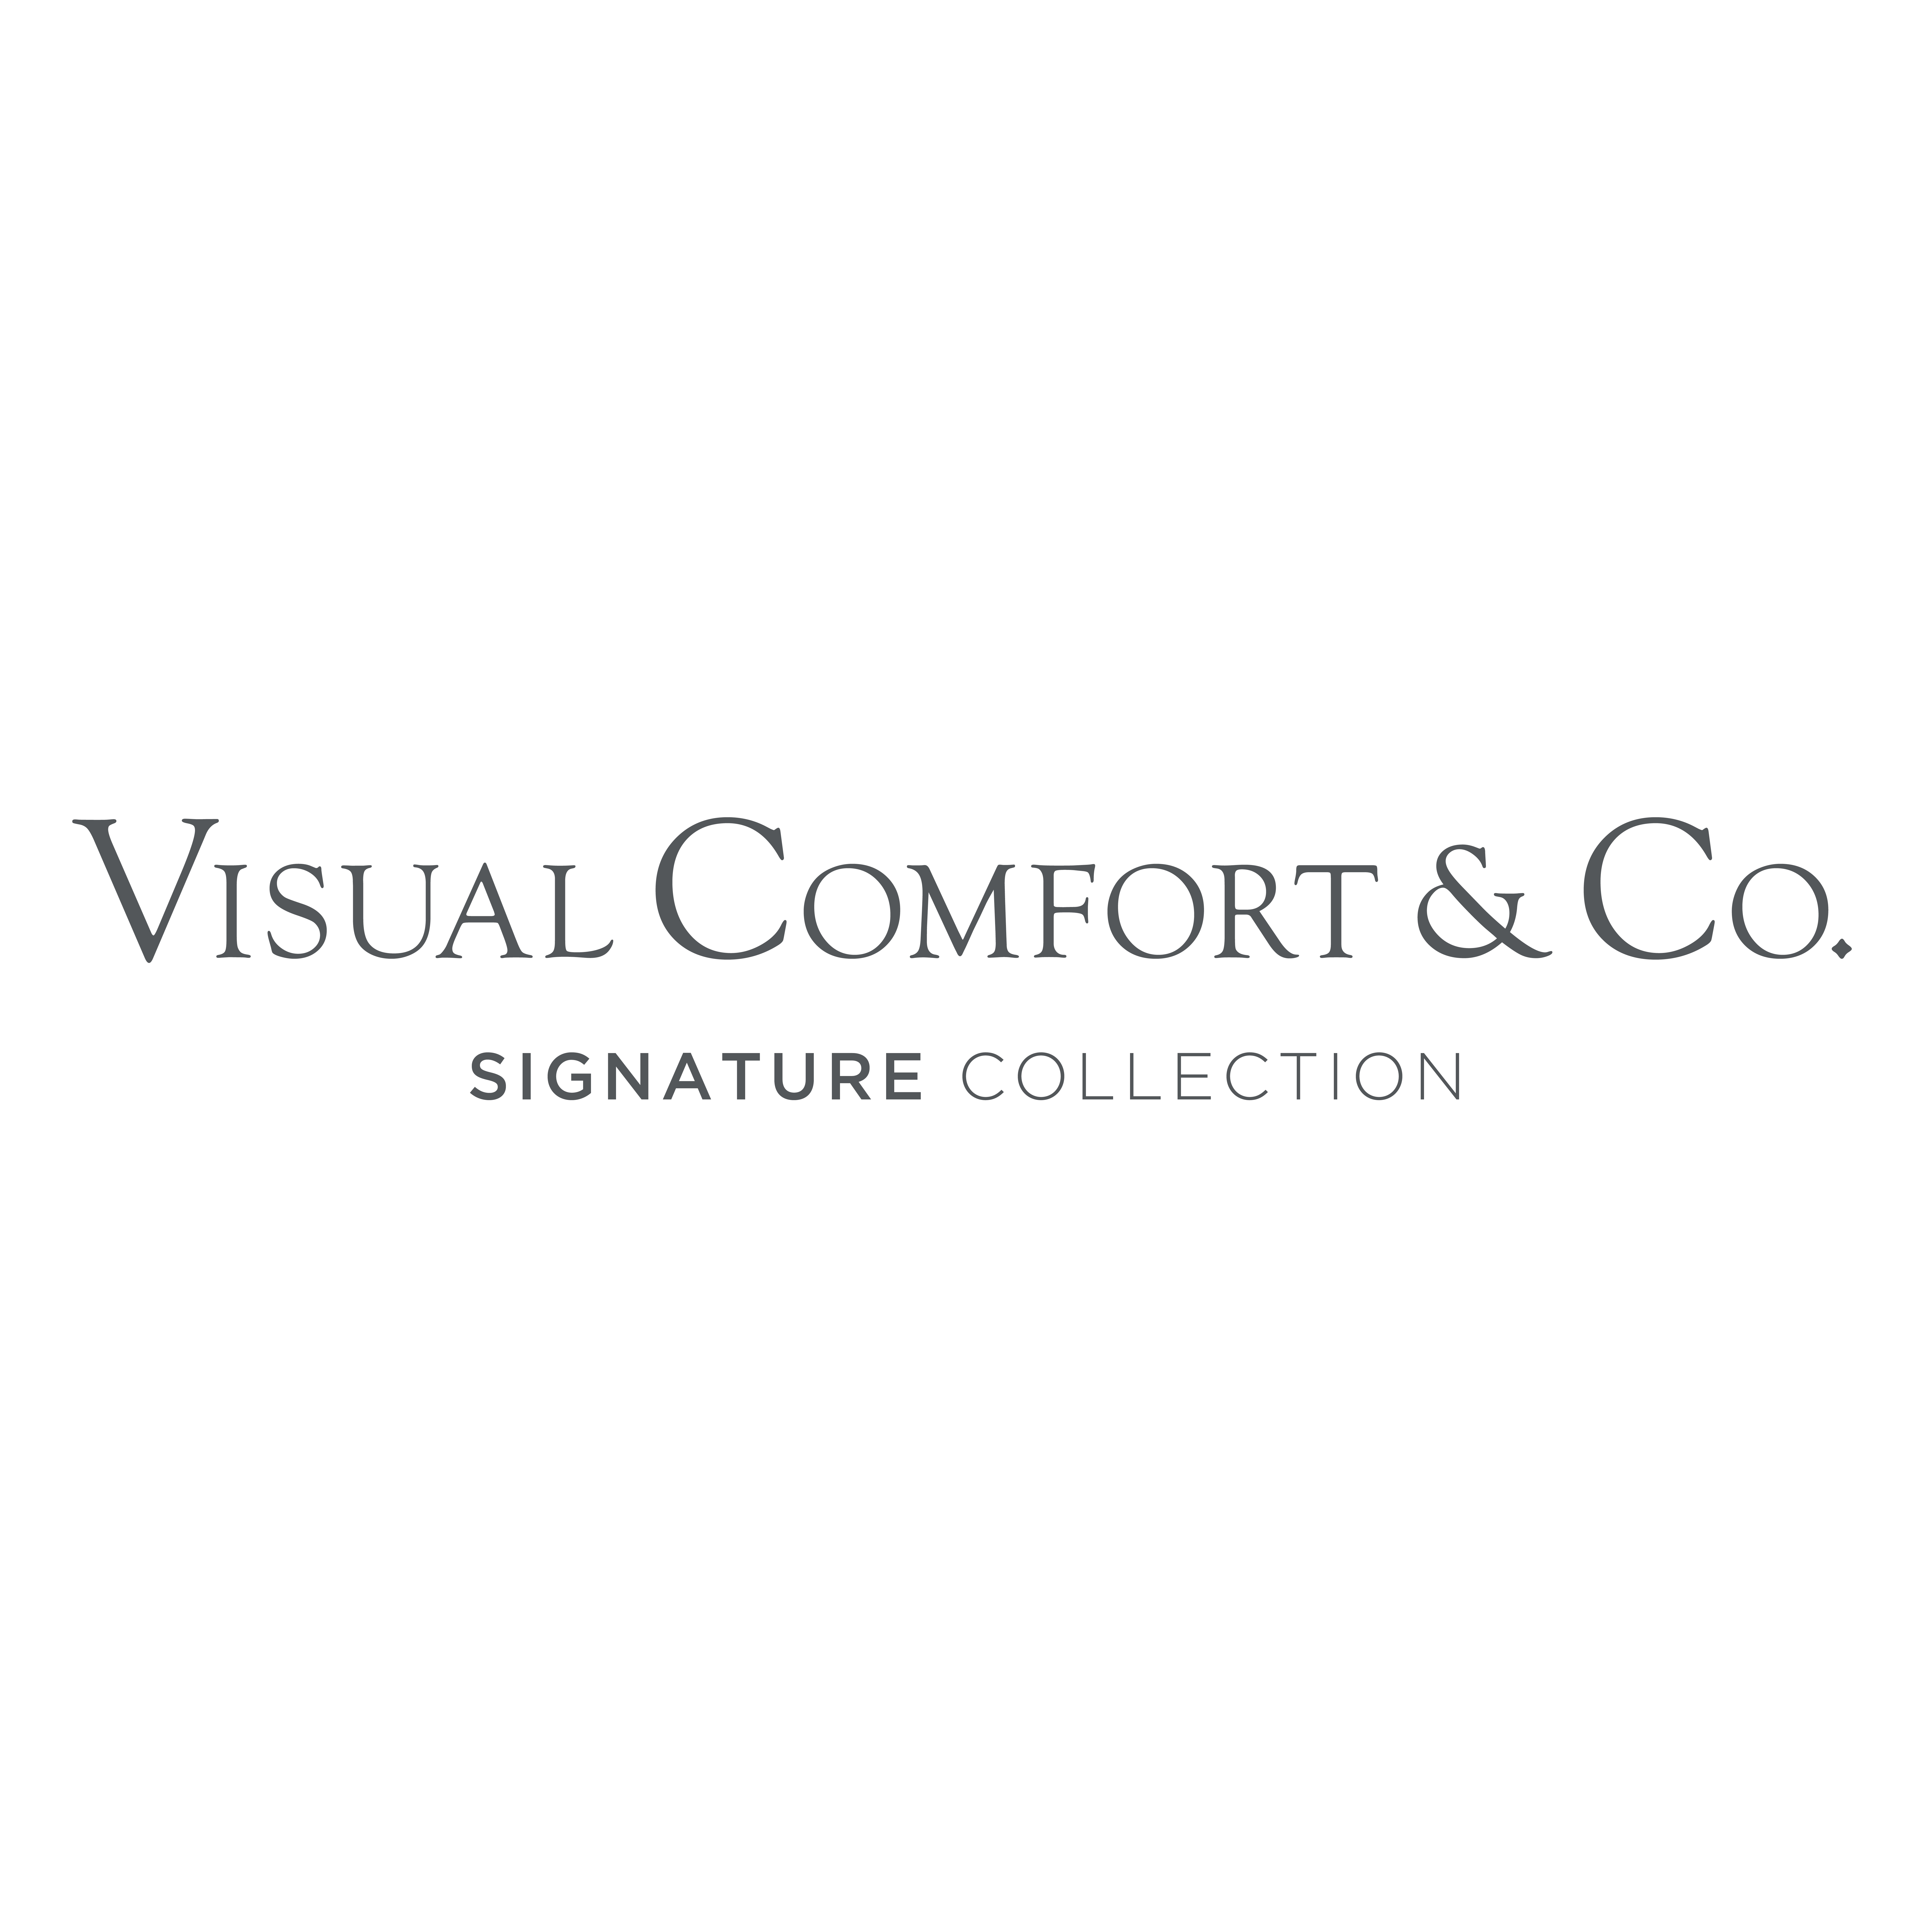 Visual Comfort & Co. Signature Collection